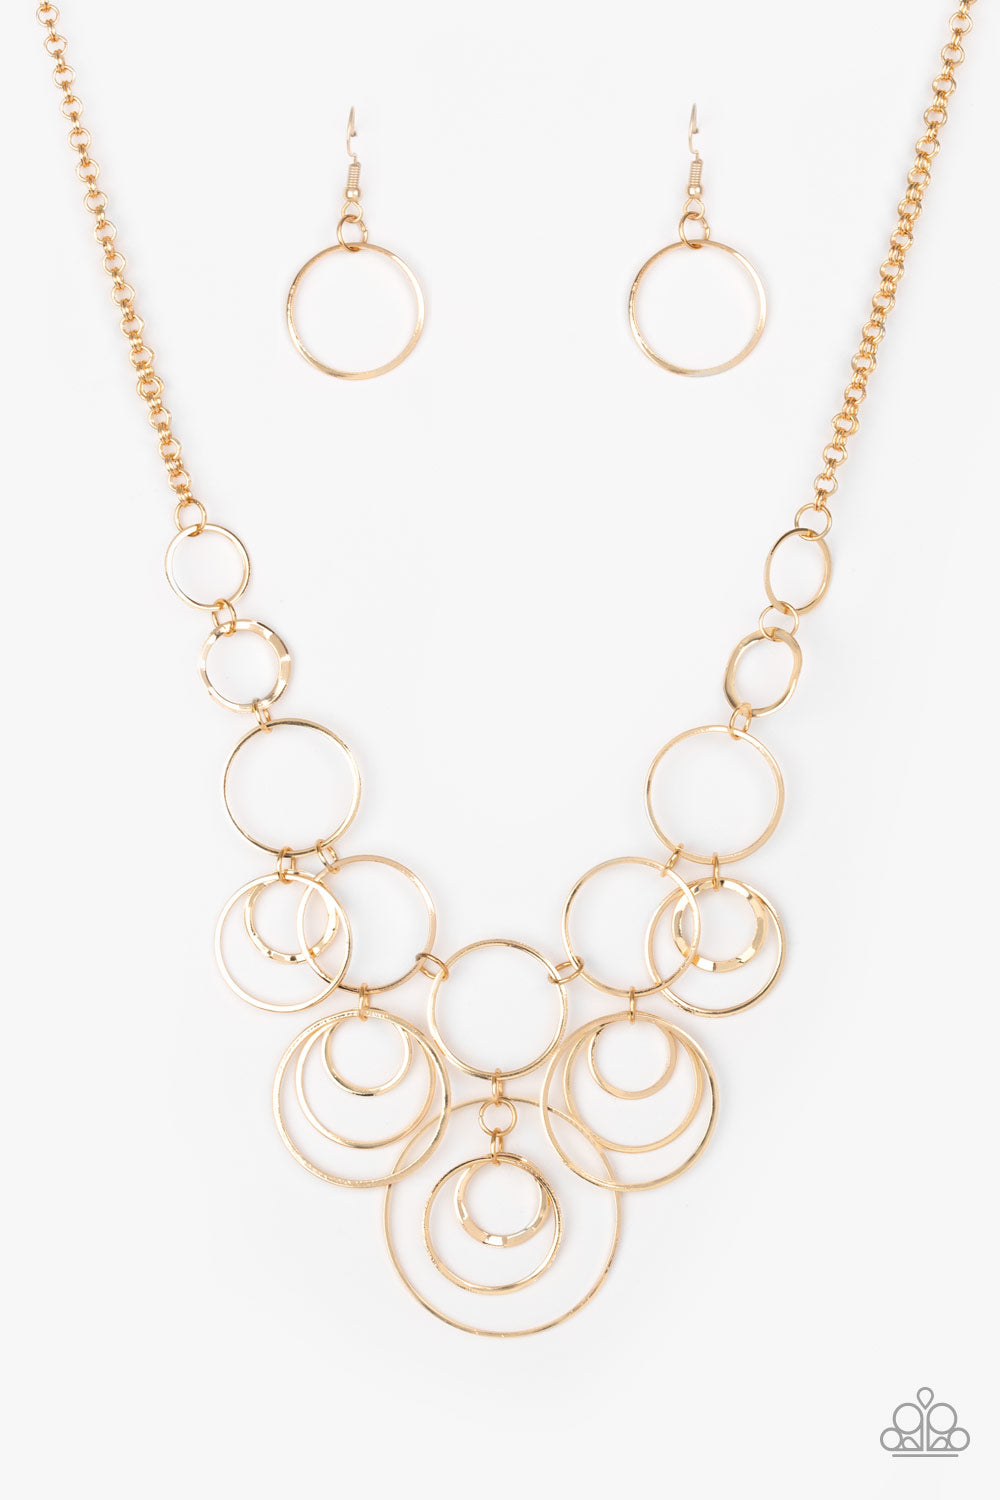 Paparazzi ♥ Break The Cycle - Gold ♥ Necklace – LisaAbercrombie